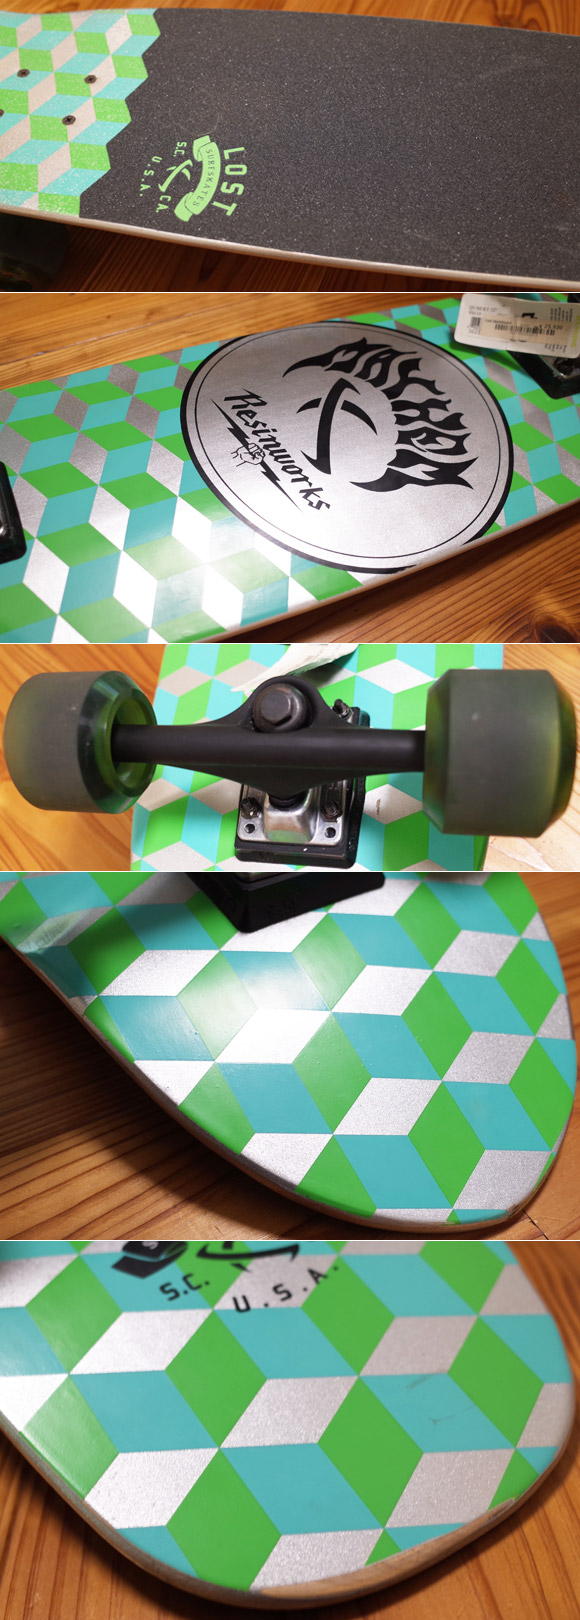 LOST SURFSKATES  QUBERT 32" SS 610 中古スケートボード condition No.96291445